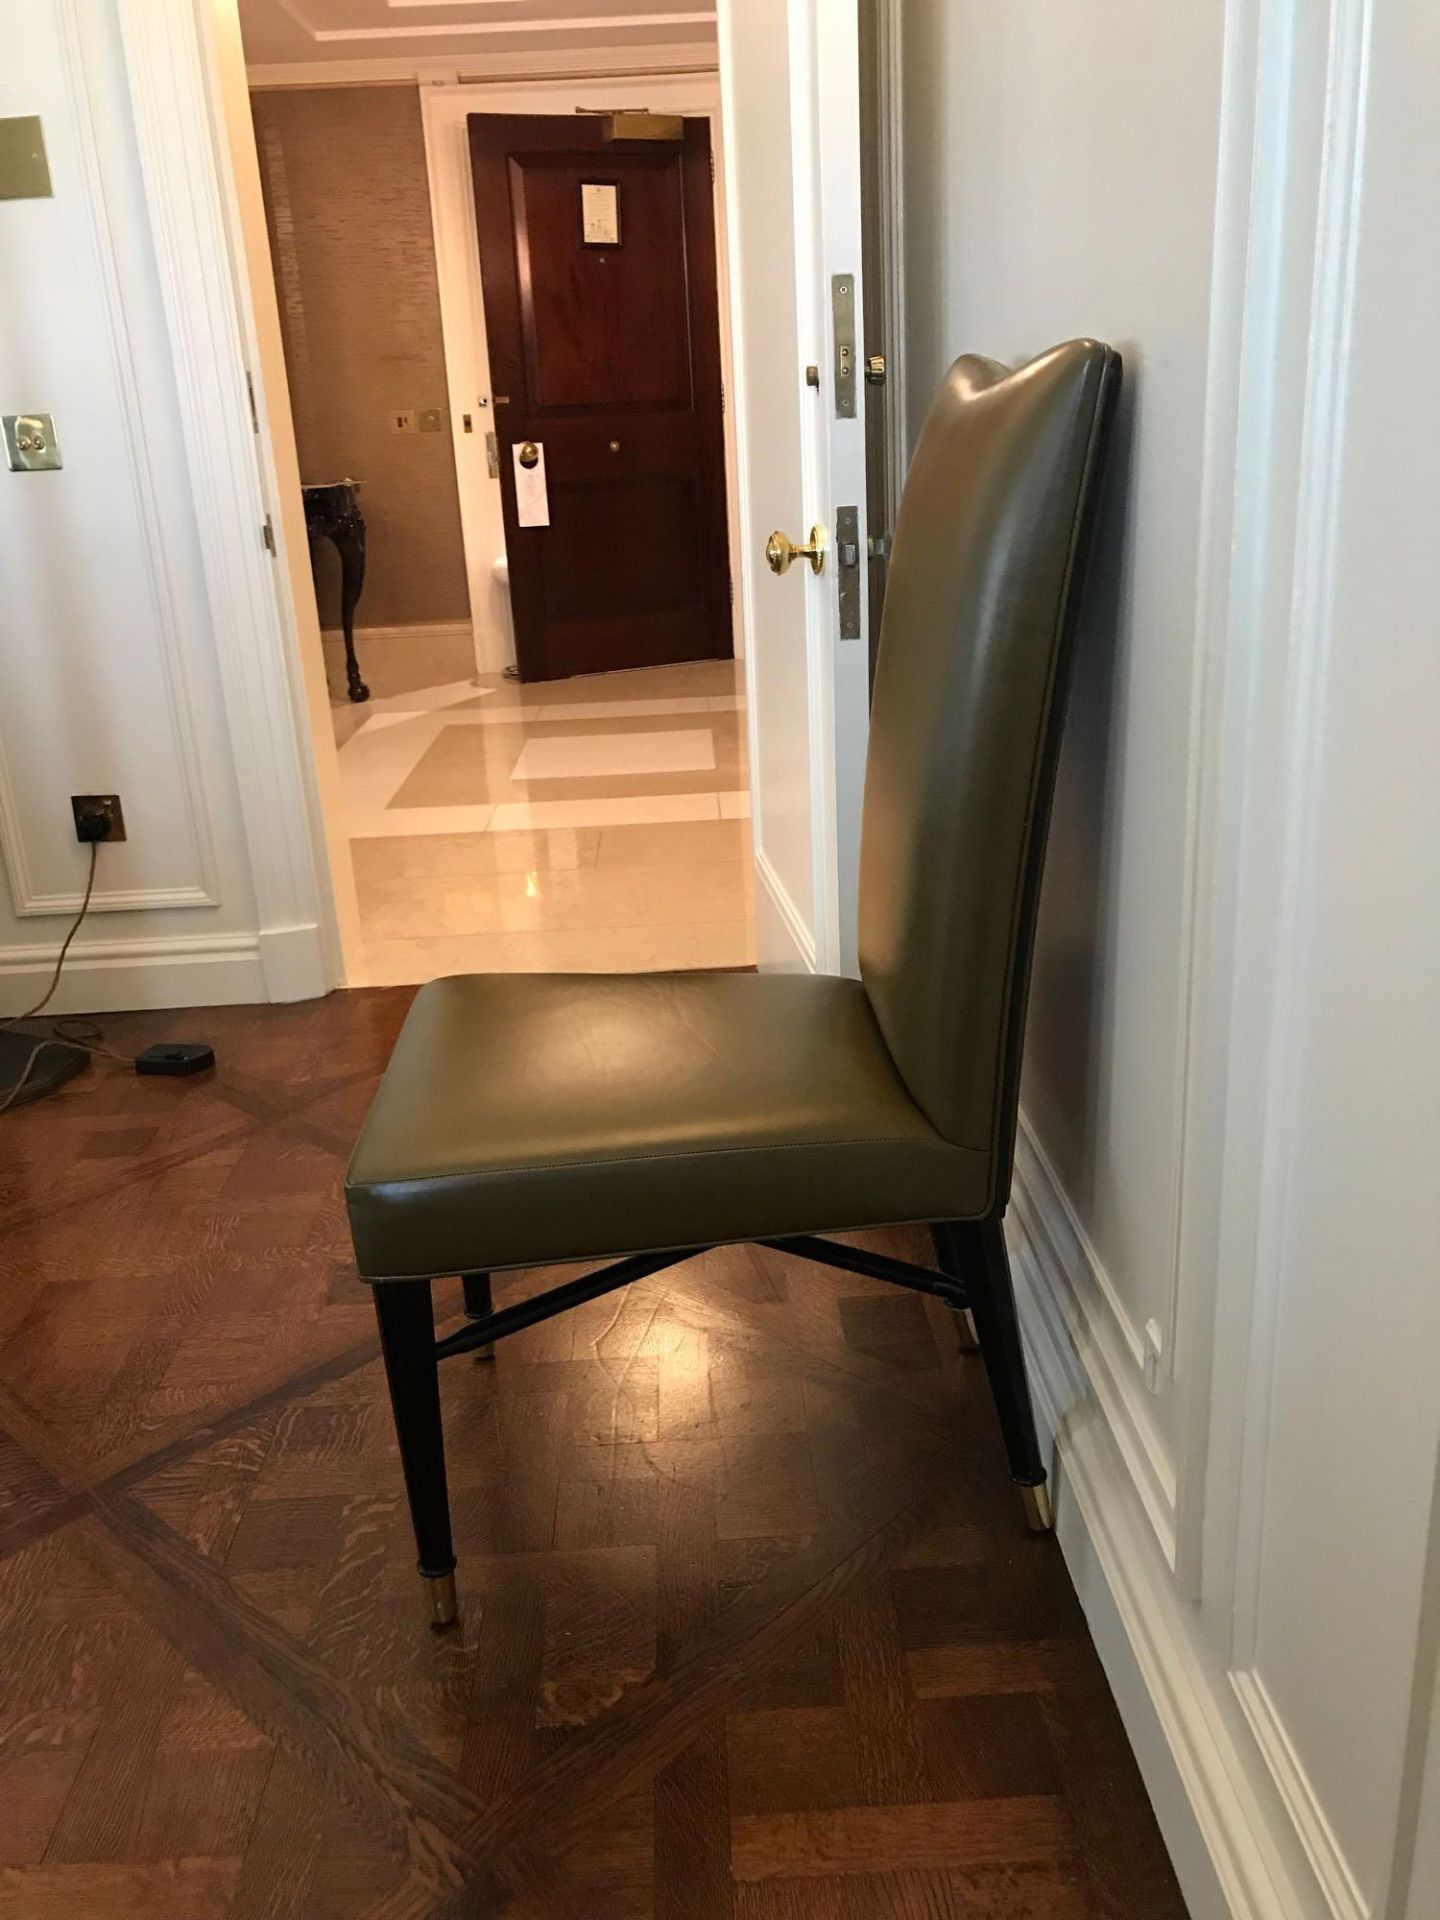 A Set Of 4 x Decca Side Chairs Upholstered In Green Leather 45 x 45 x 98cm Room 606/7 - Image 2 of 2